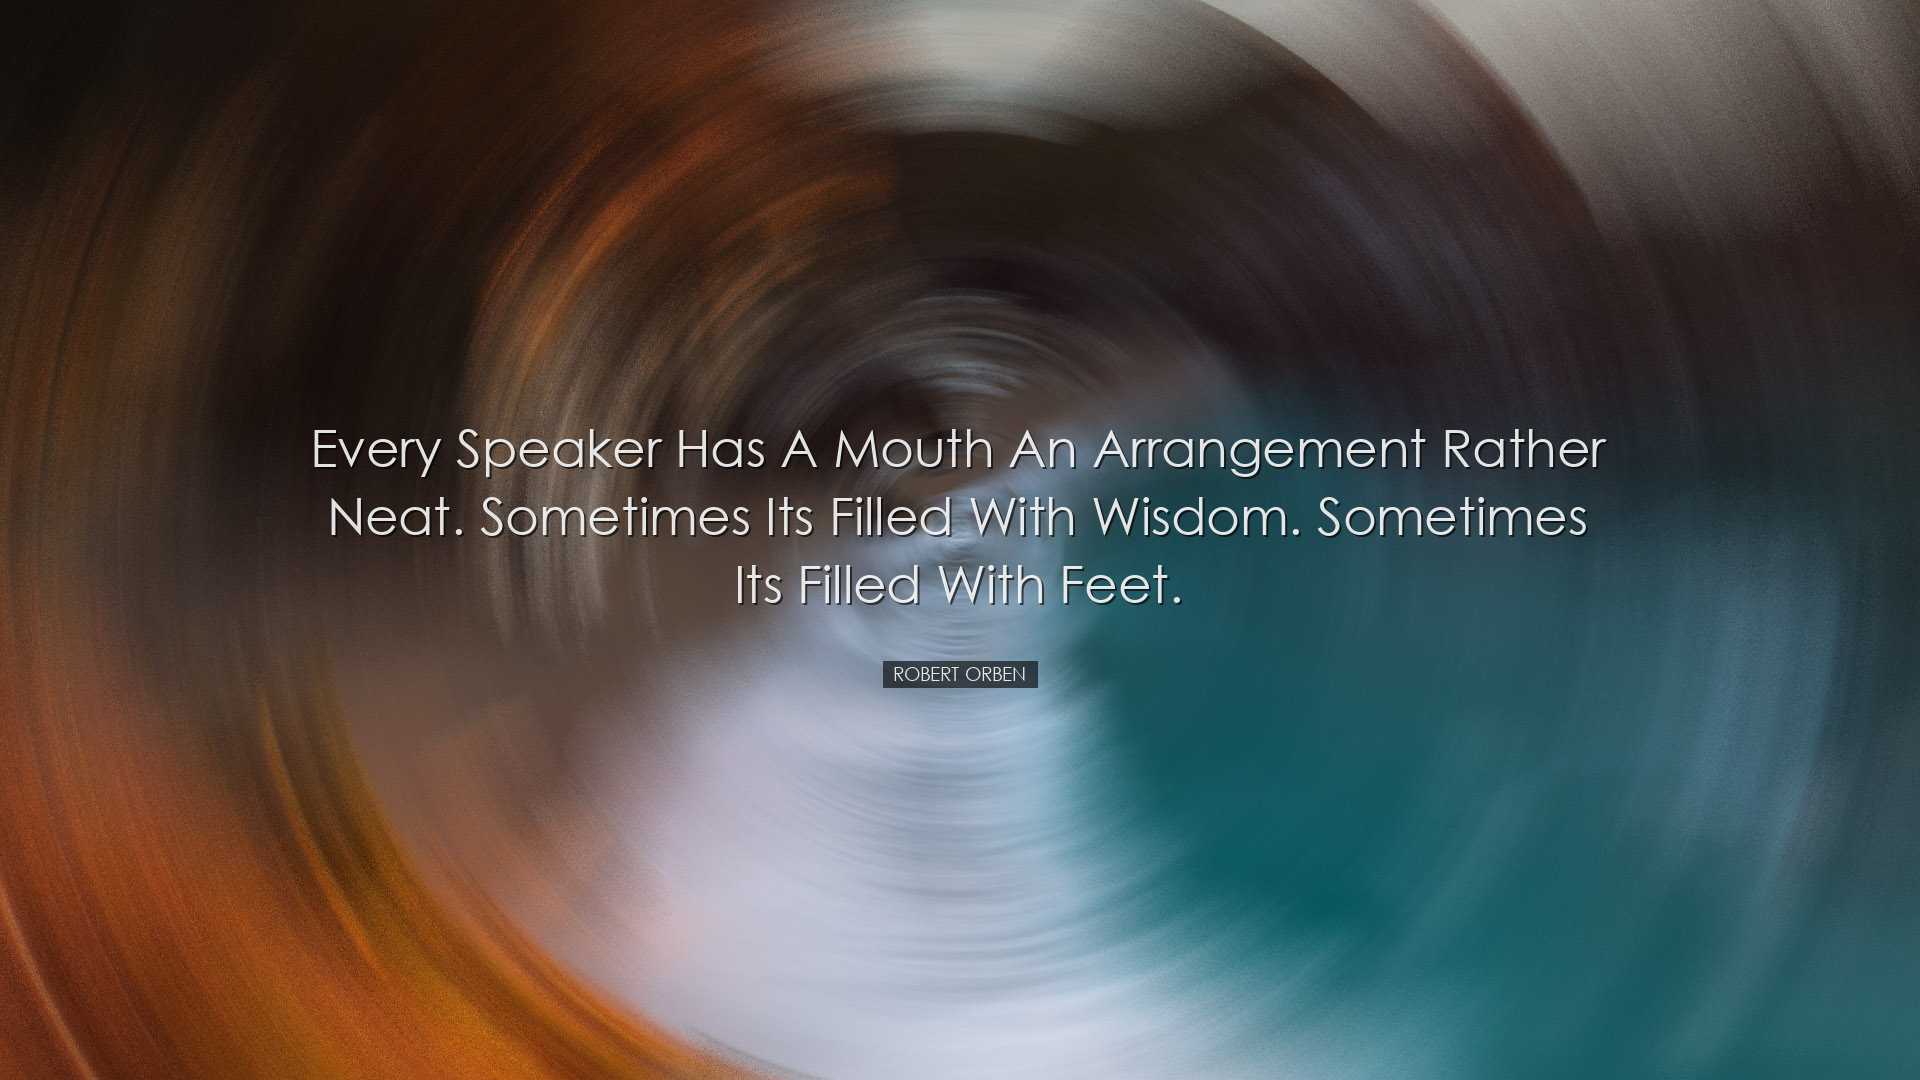 Every speaker has a mouth An arrangement rather neat. Sometimes it